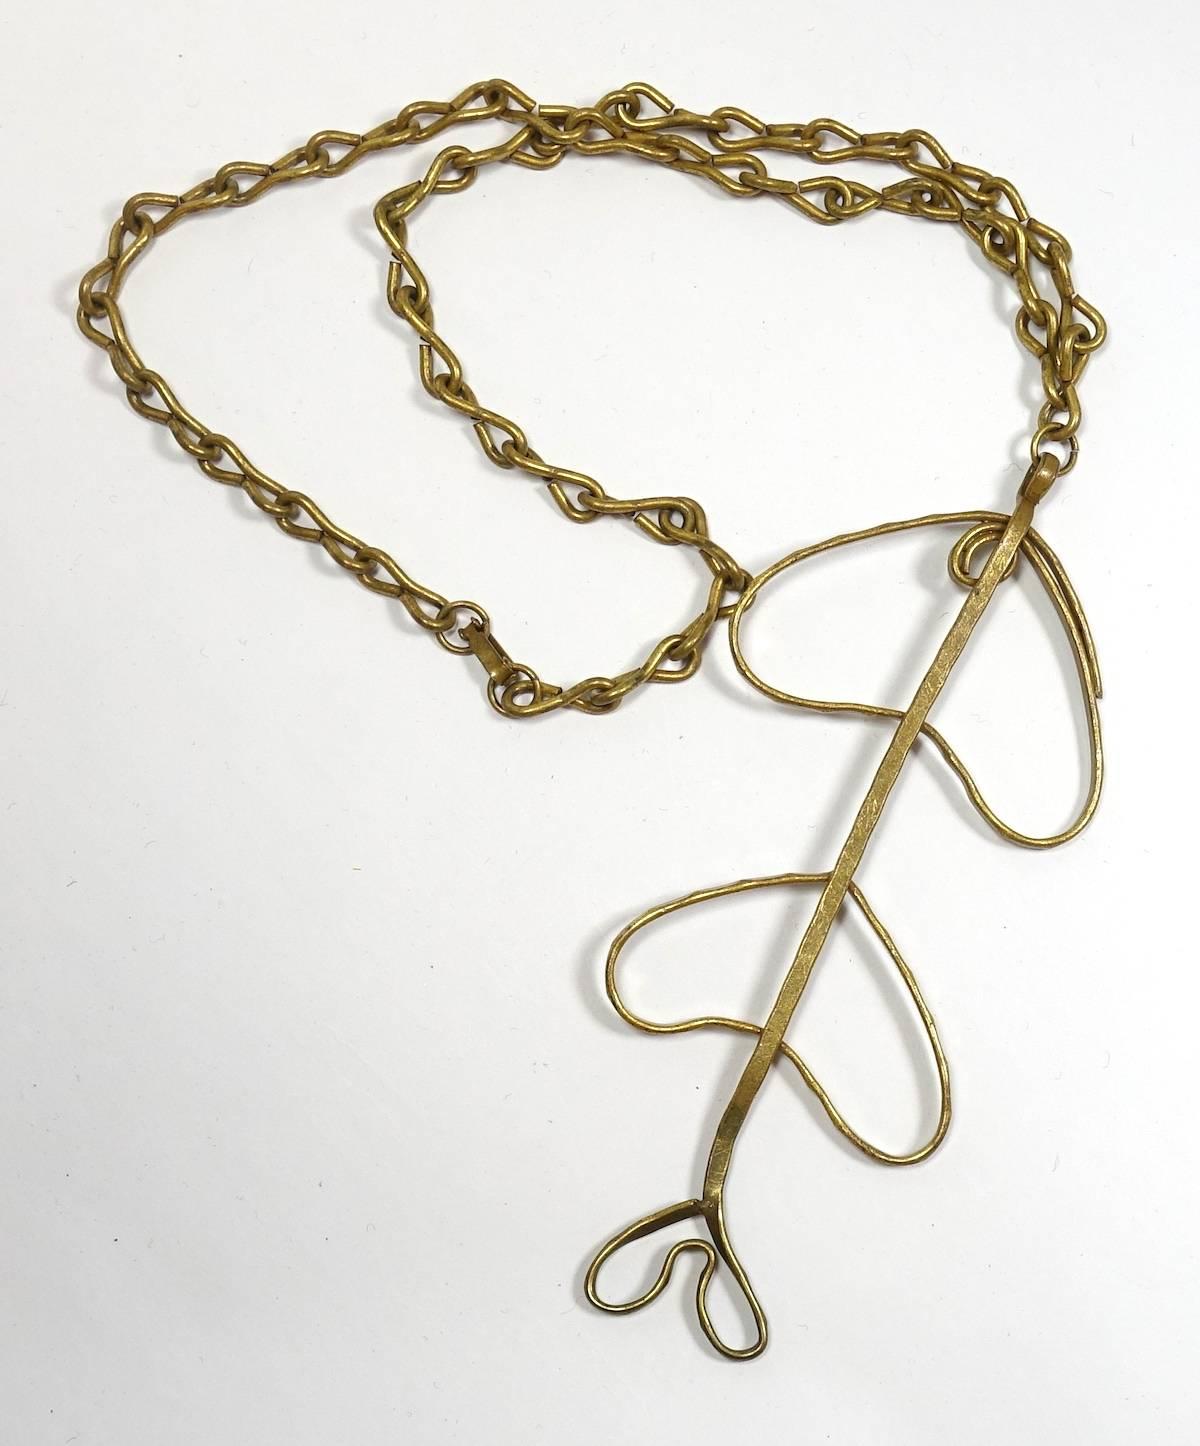 This vintage 1970s necklace features a heavily etched, open-work design in a gold-plated base metal setting.  In excellent condition, this necklace measures 24” with an 11” front drop with a hook closure.  